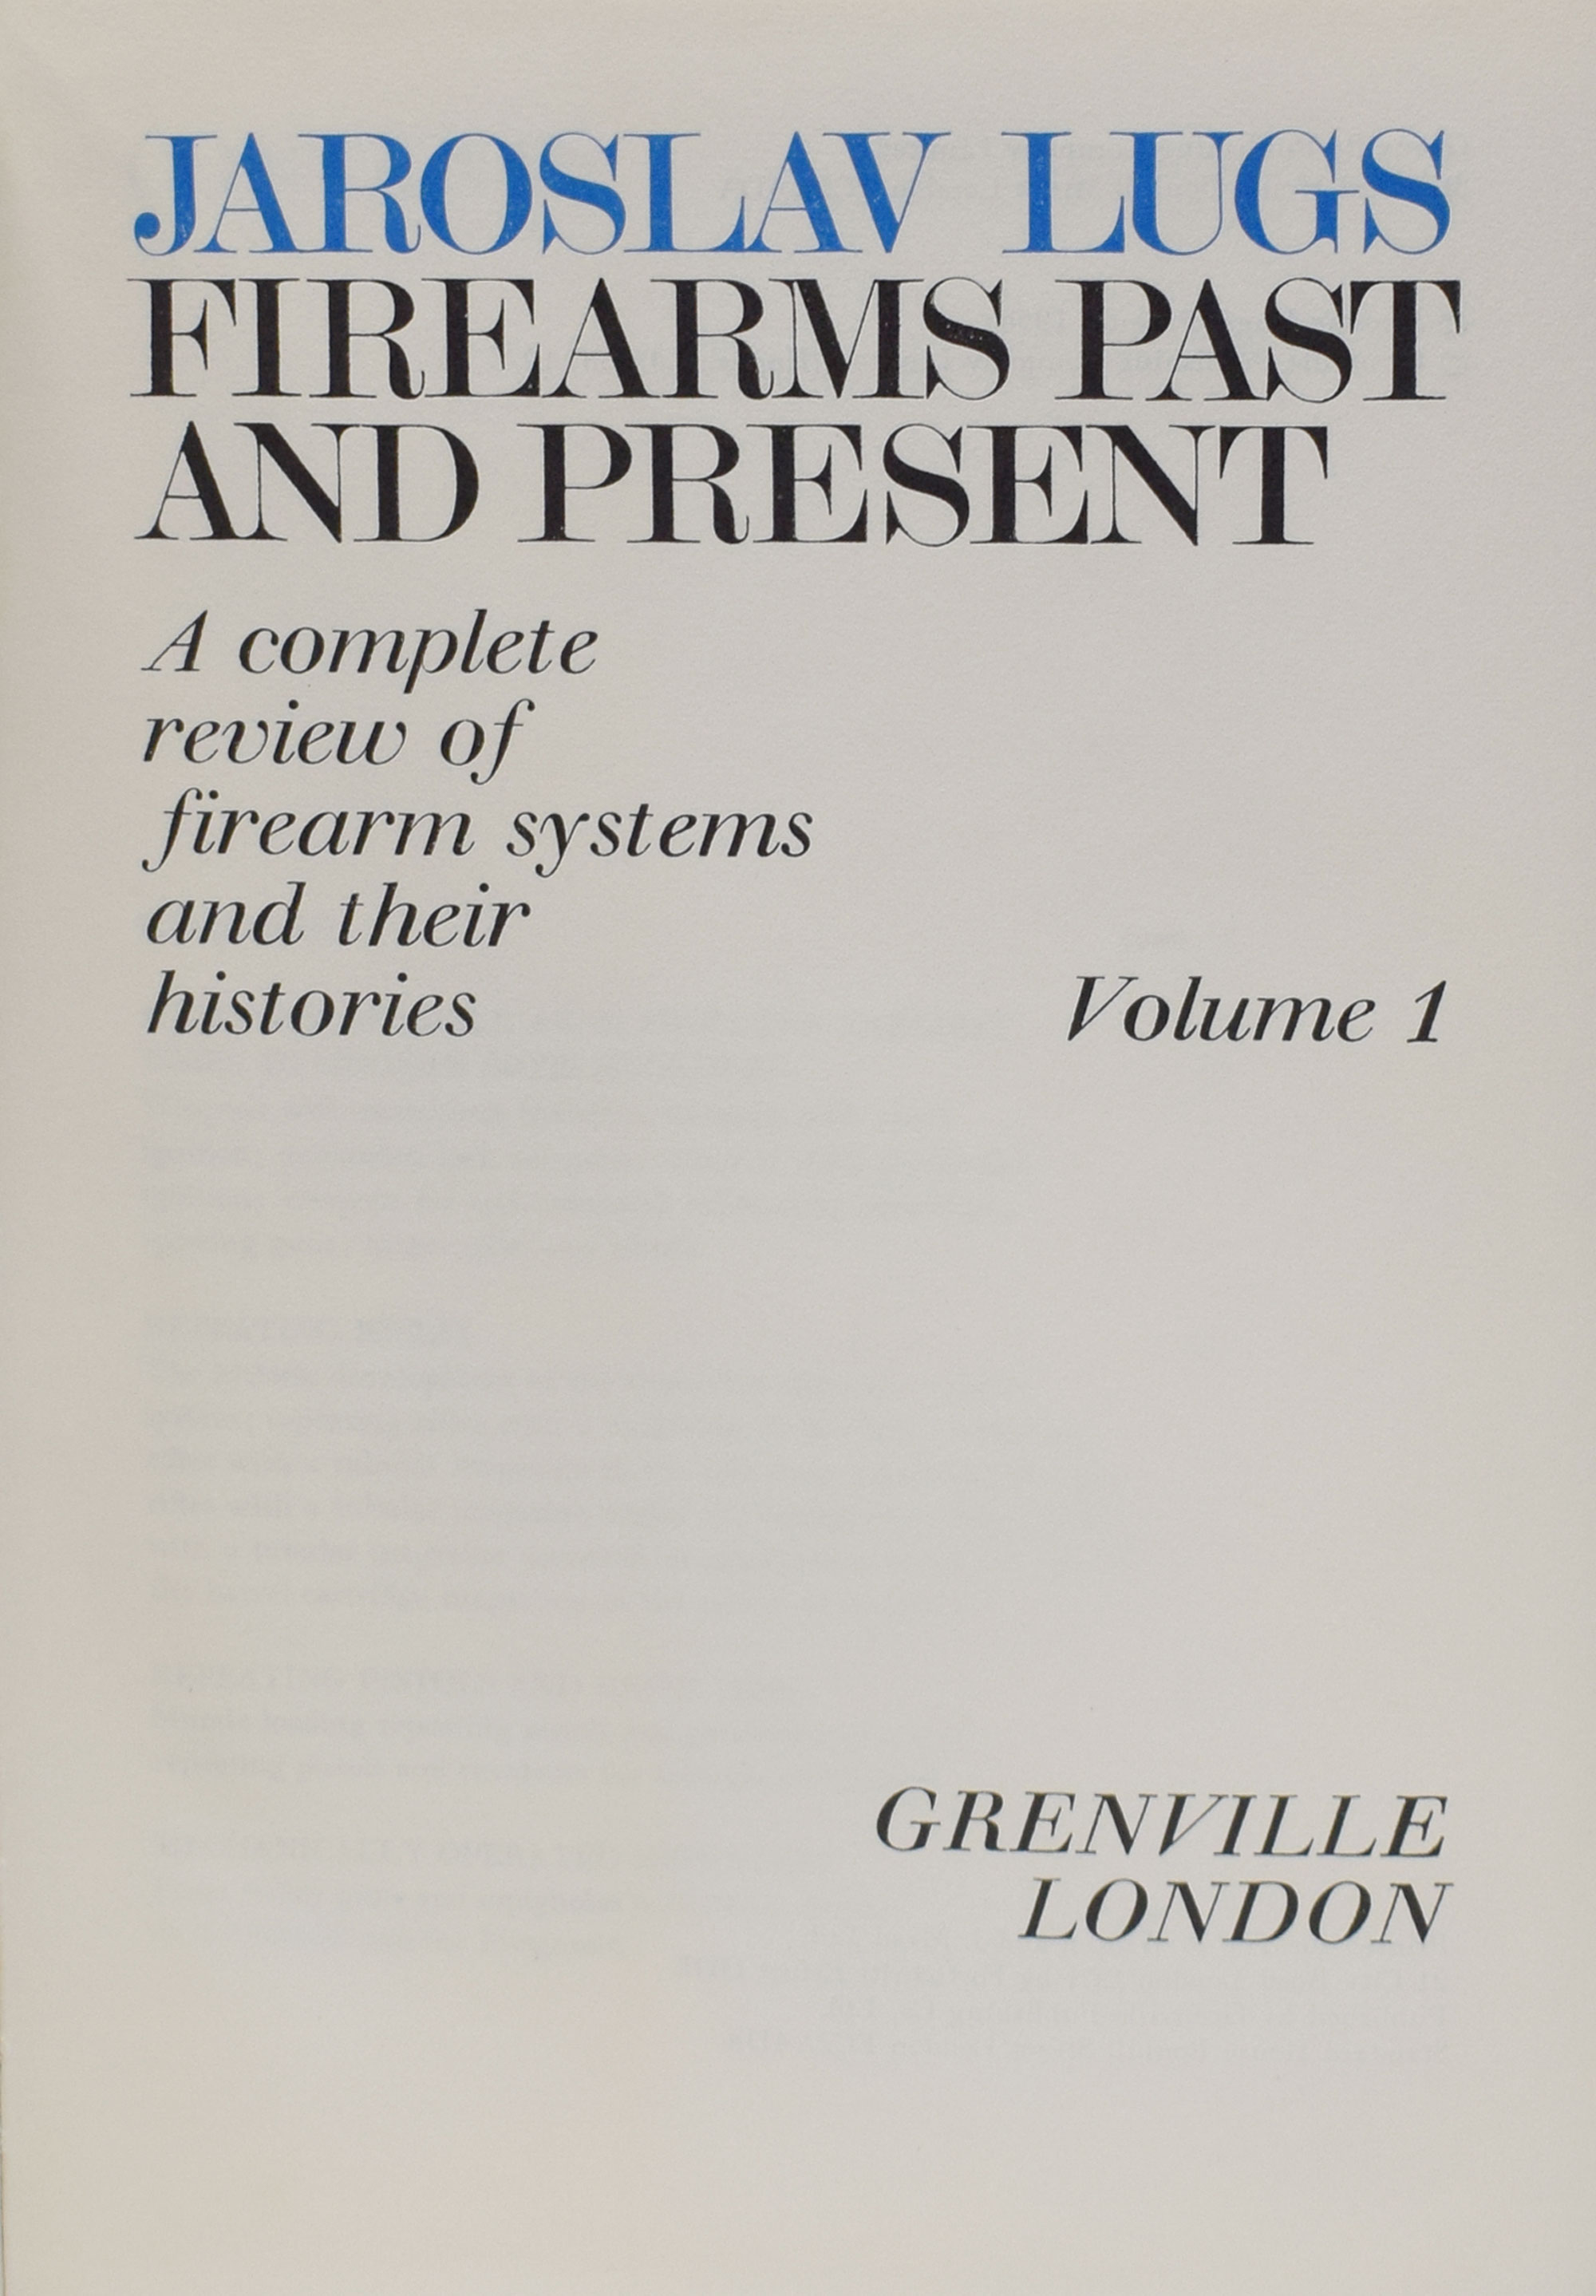 Firearms Past and Present. A Complete Review of Firearm Systems and their Histories. 2 volume set in slipcase.